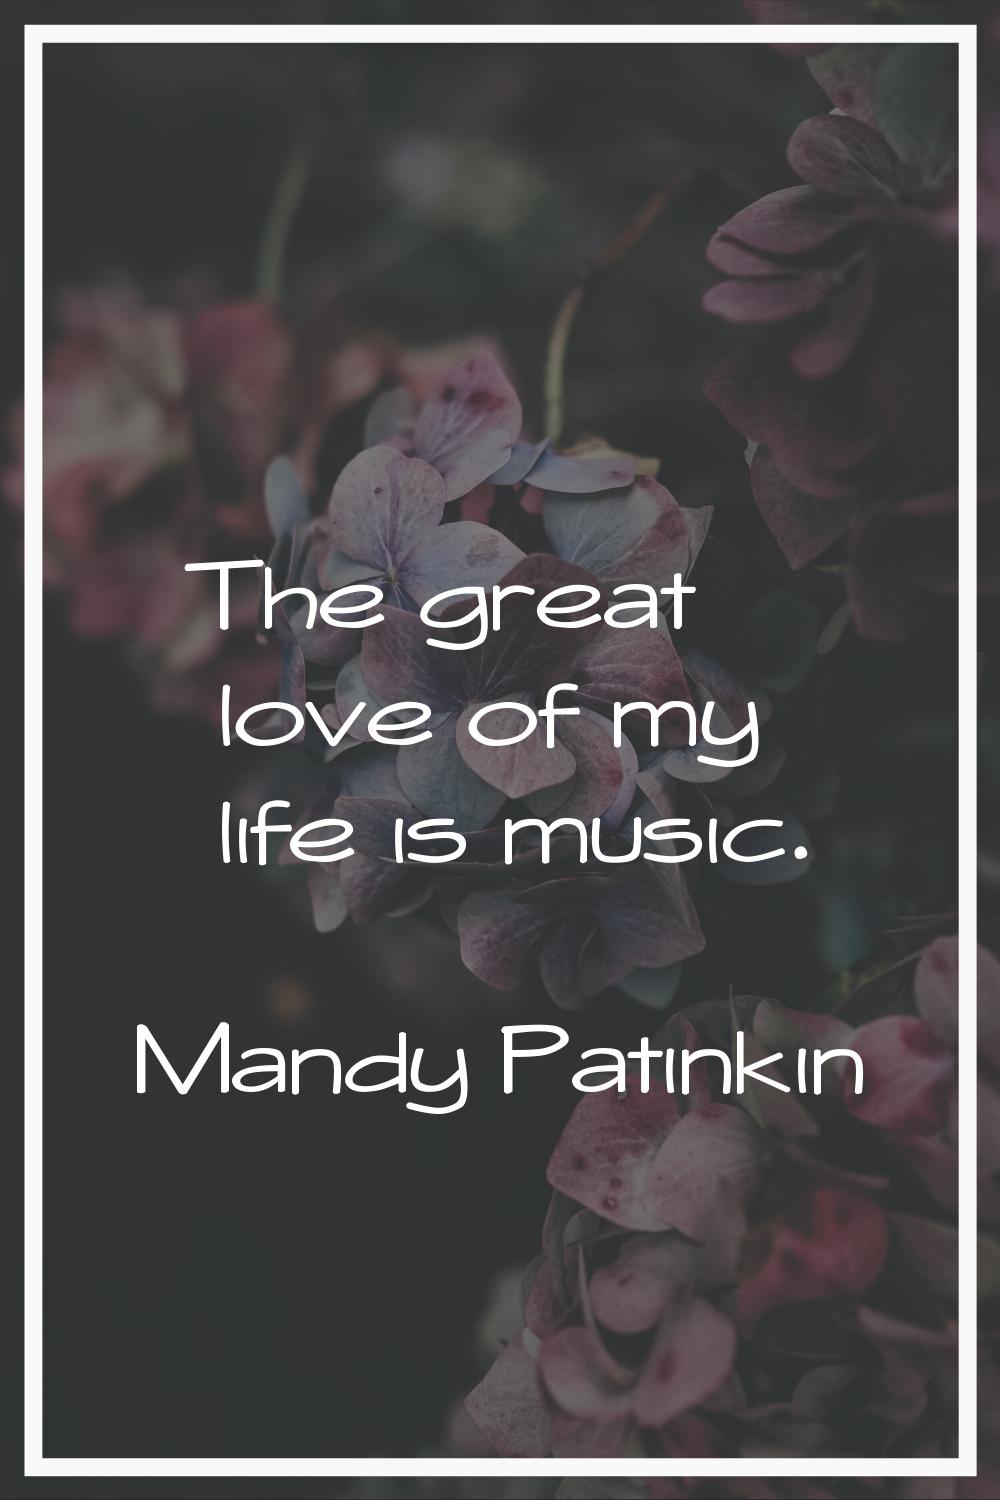 The great love of my life is music.